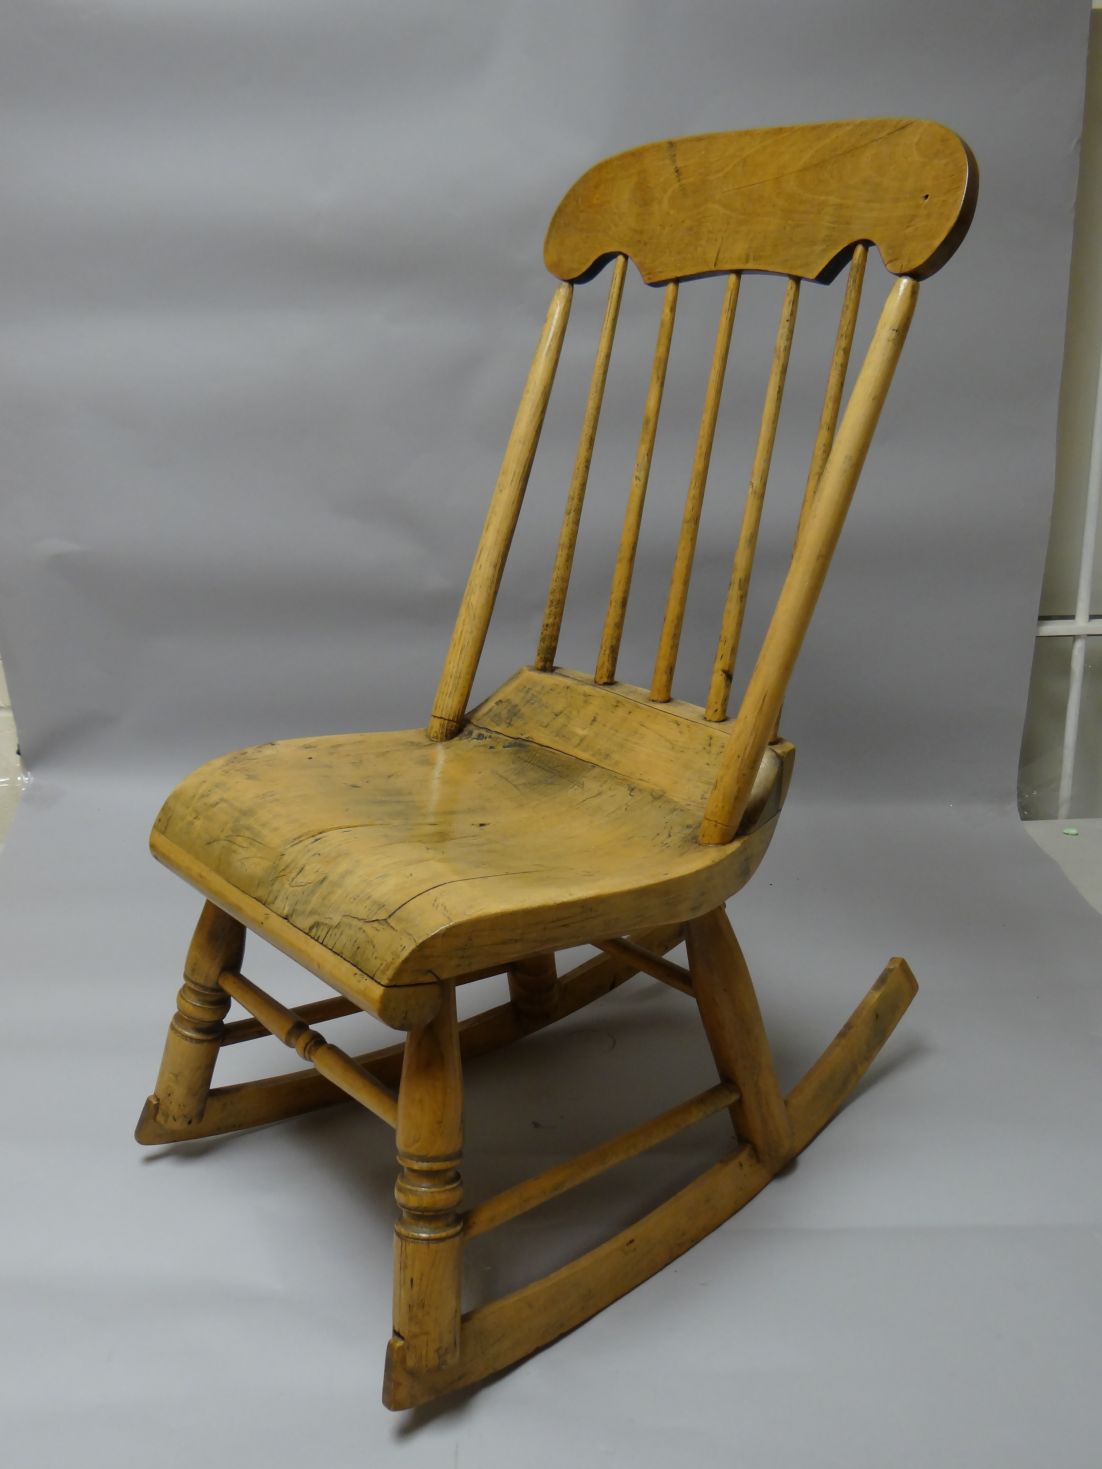 A small primitive New England style rocking-chair with spindle back